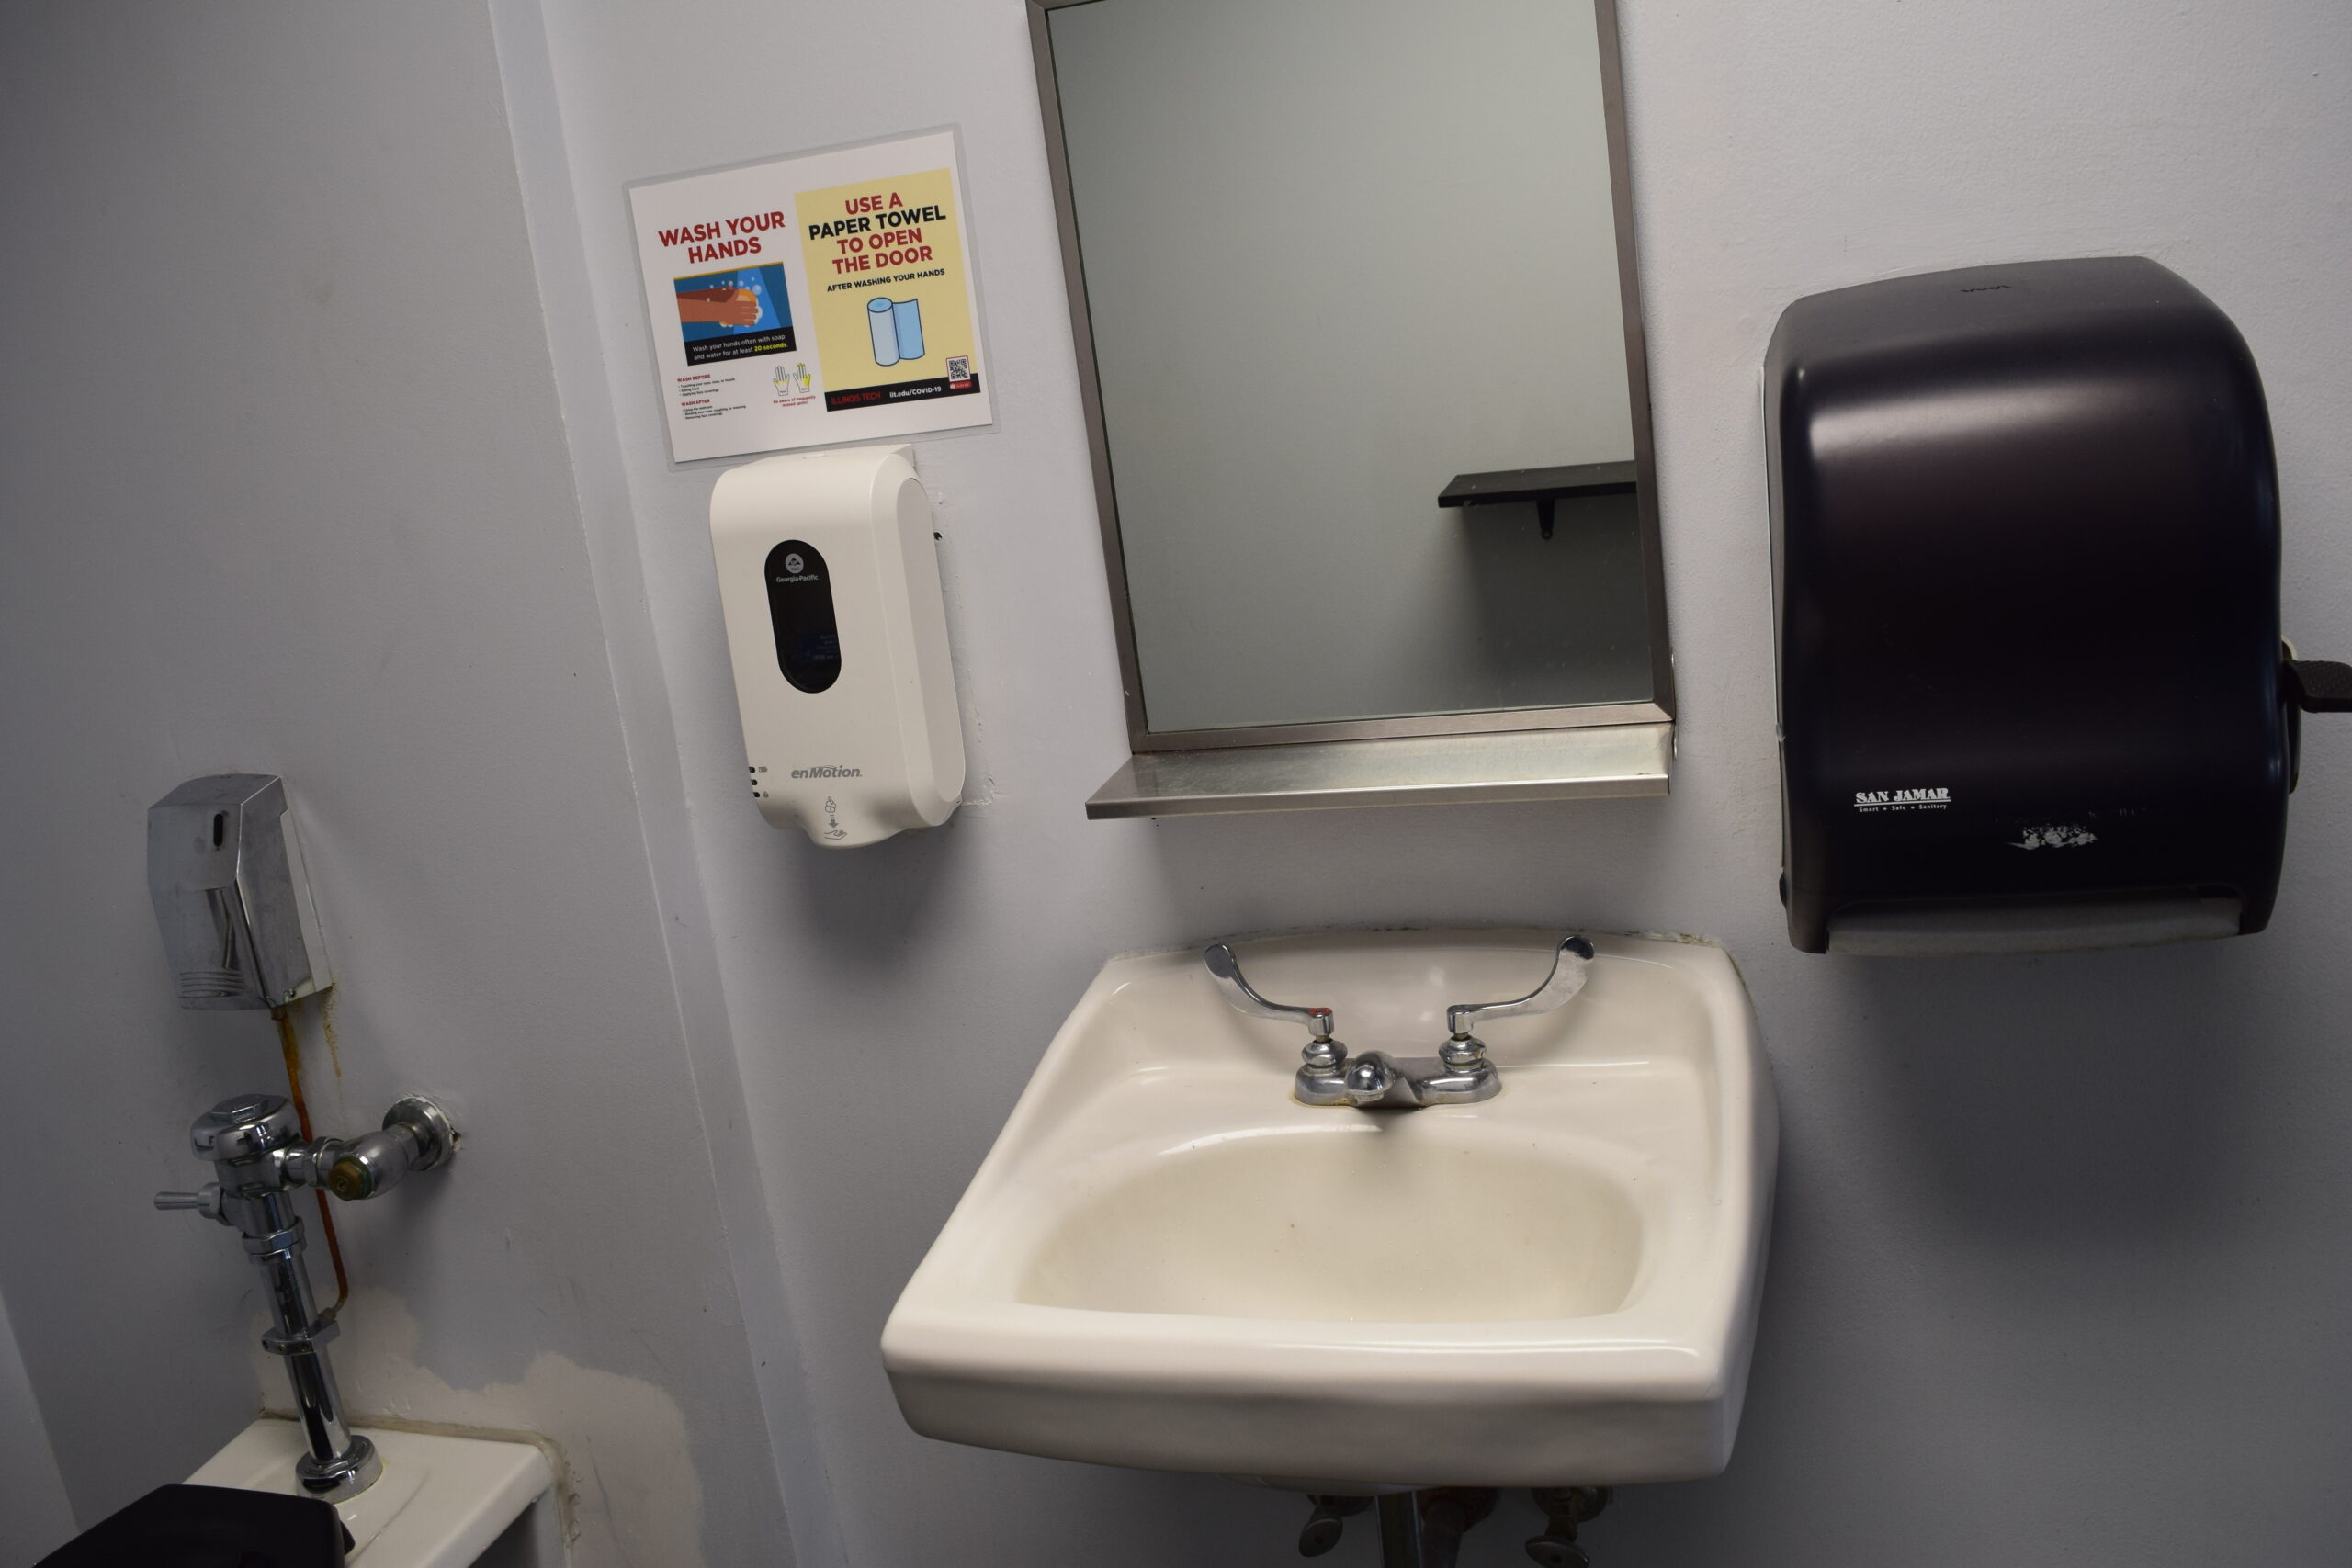 A sink with large hot and cold knobs, with an automatic soap dispenser on the left and a manually-operated paper towel dispenser on the right.